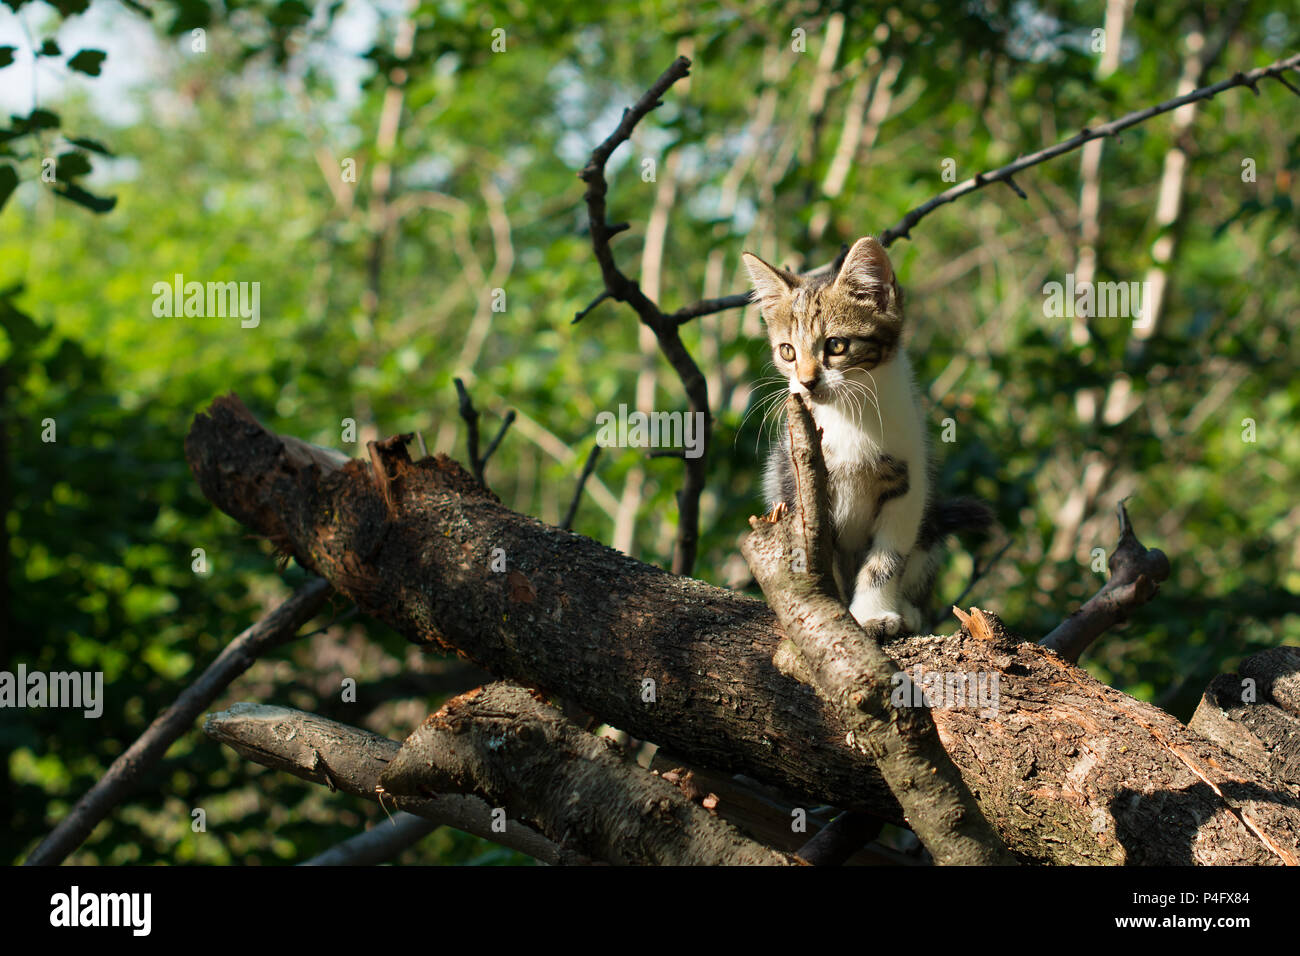 Cute kitty is standing on a tree trunk in the woods. The kitten is a domestic short-haired cat. Stock Photo